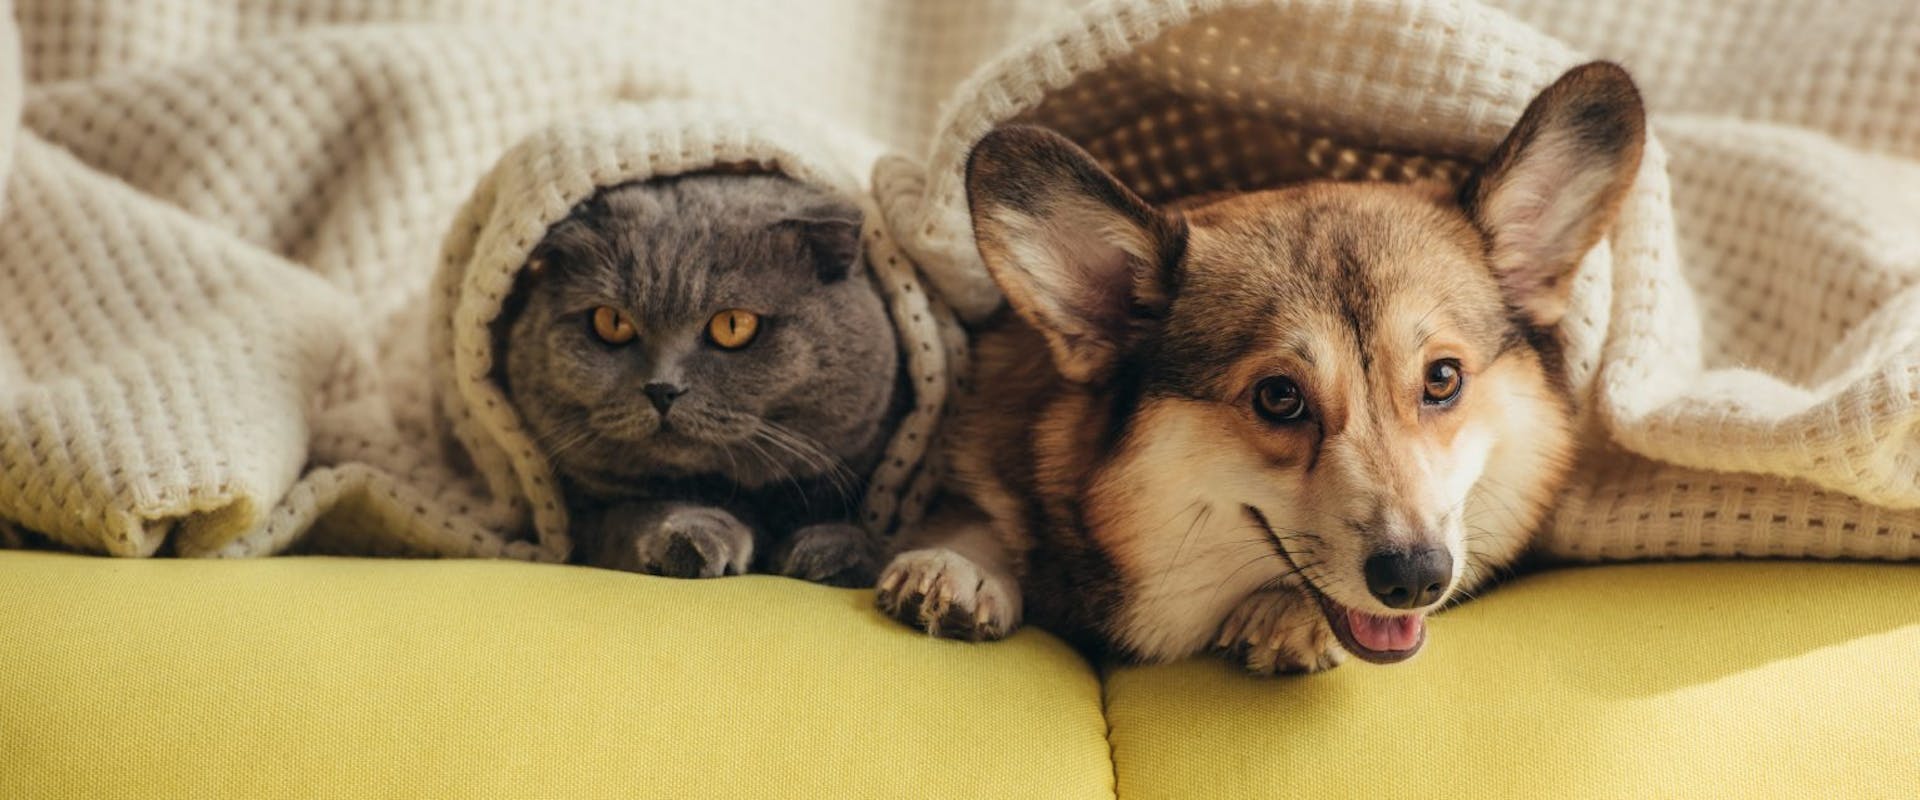 A cat and a dog on the sofa under a blanket.